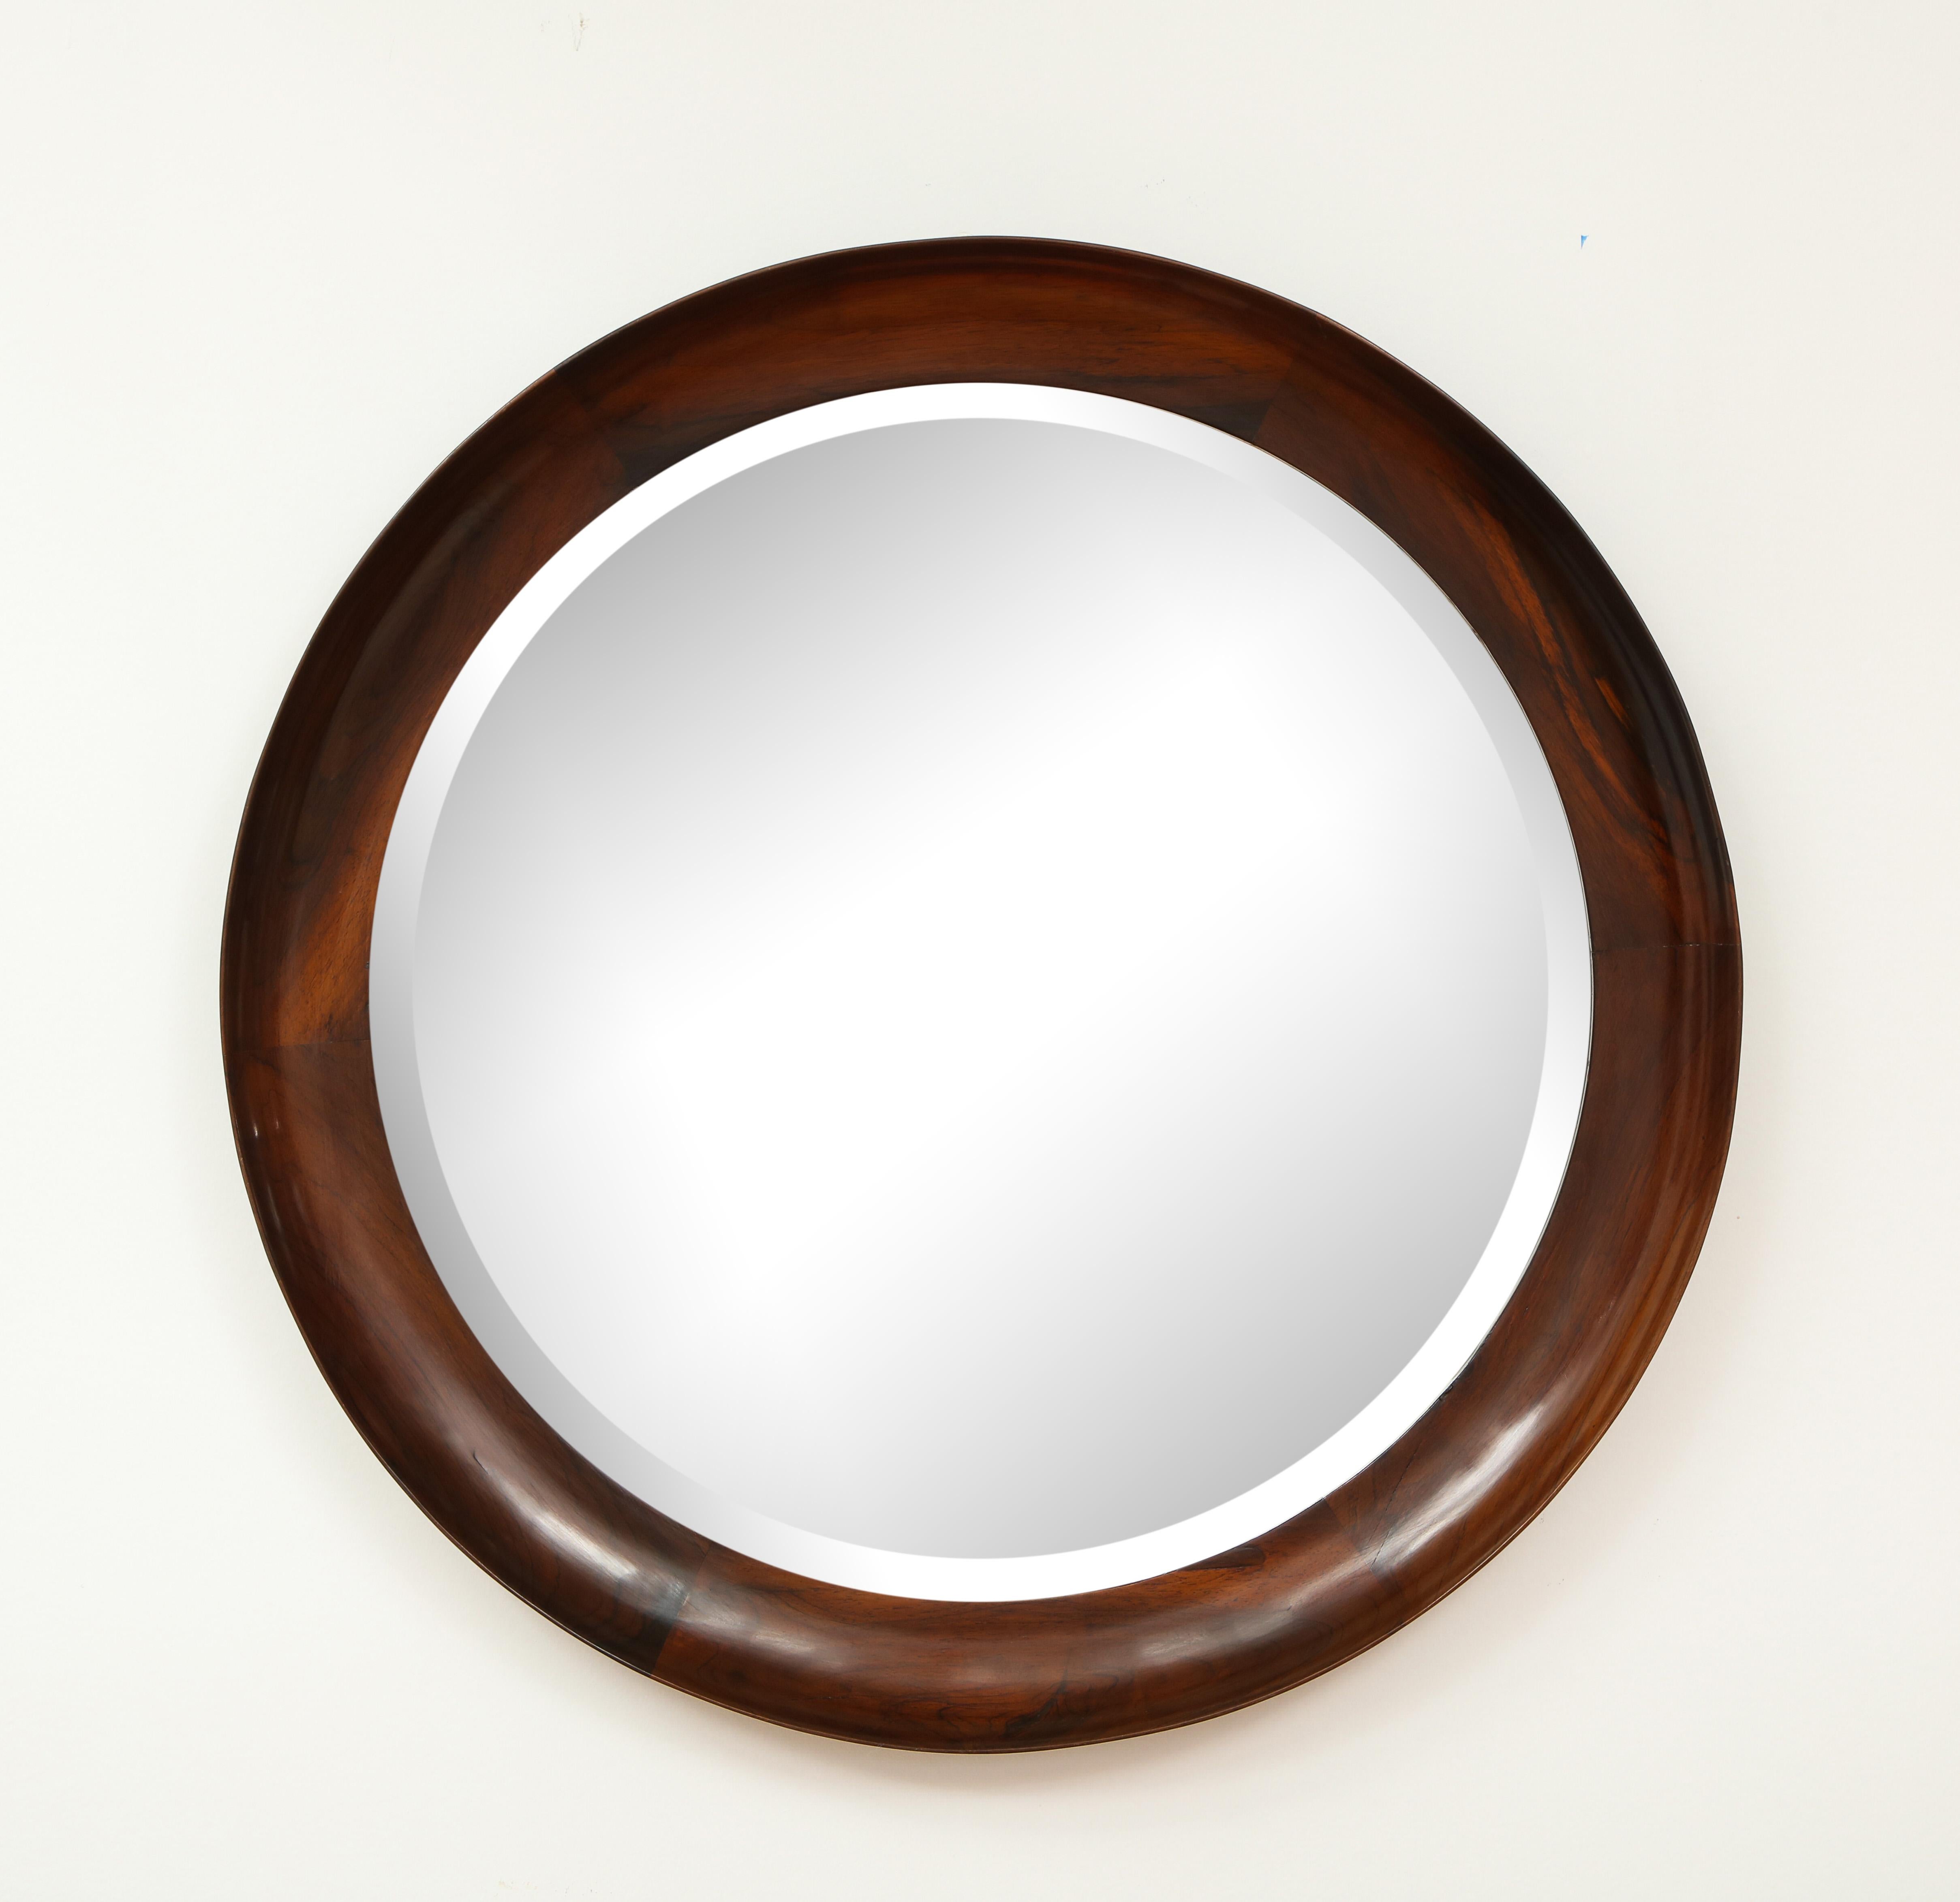 Varnished Mid-Century Modern Round Wall Mirror in Wood Frame by OCA, Brazil, 1960s